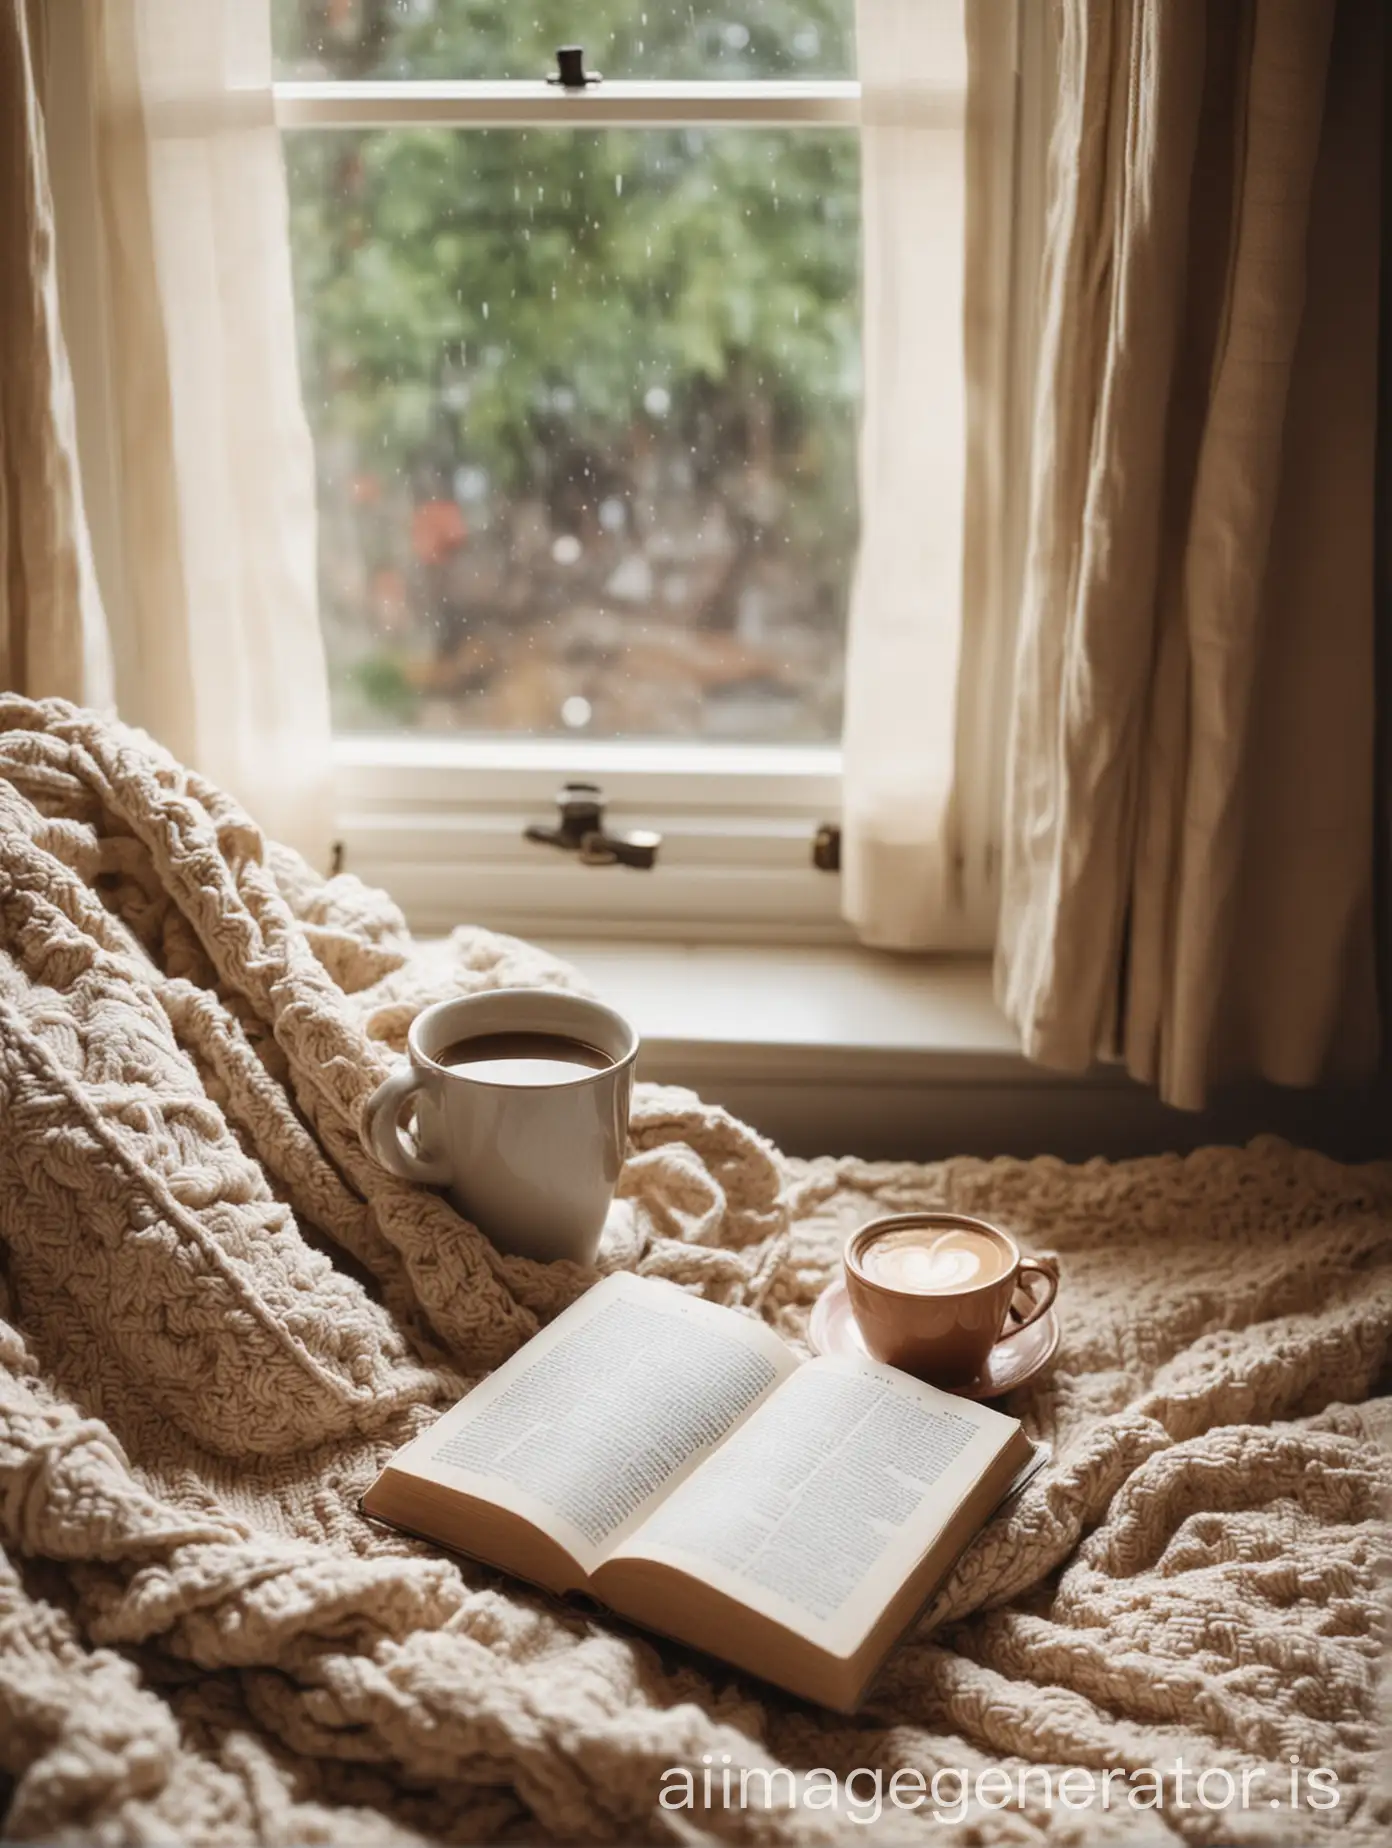 Location: Choose a cozy spot in your room with good natural light. A comfortable chair or sofa near a window is ideal. Props: A book in hand, a cup of coffee or tea, a soft blanket, or decorative pillows to enhance the cozy atmosphere. Focus: Capture the book, the coffee cup, and part of your outfit or surroundings, ensuring your face is hidden.